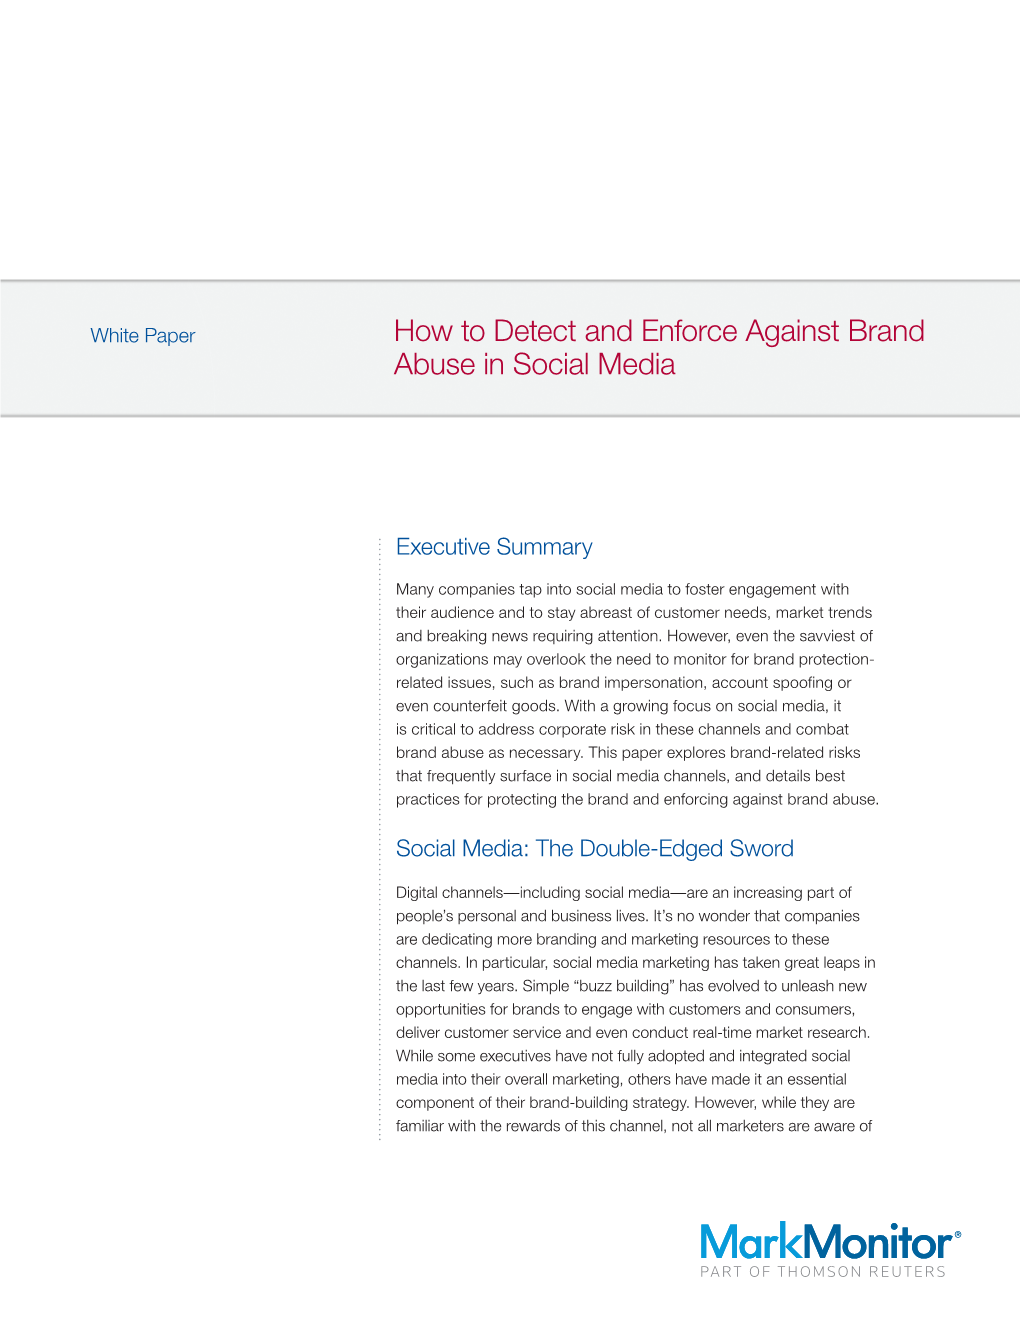 How to Detect and Enforce Against Brand Abuse in Social Media